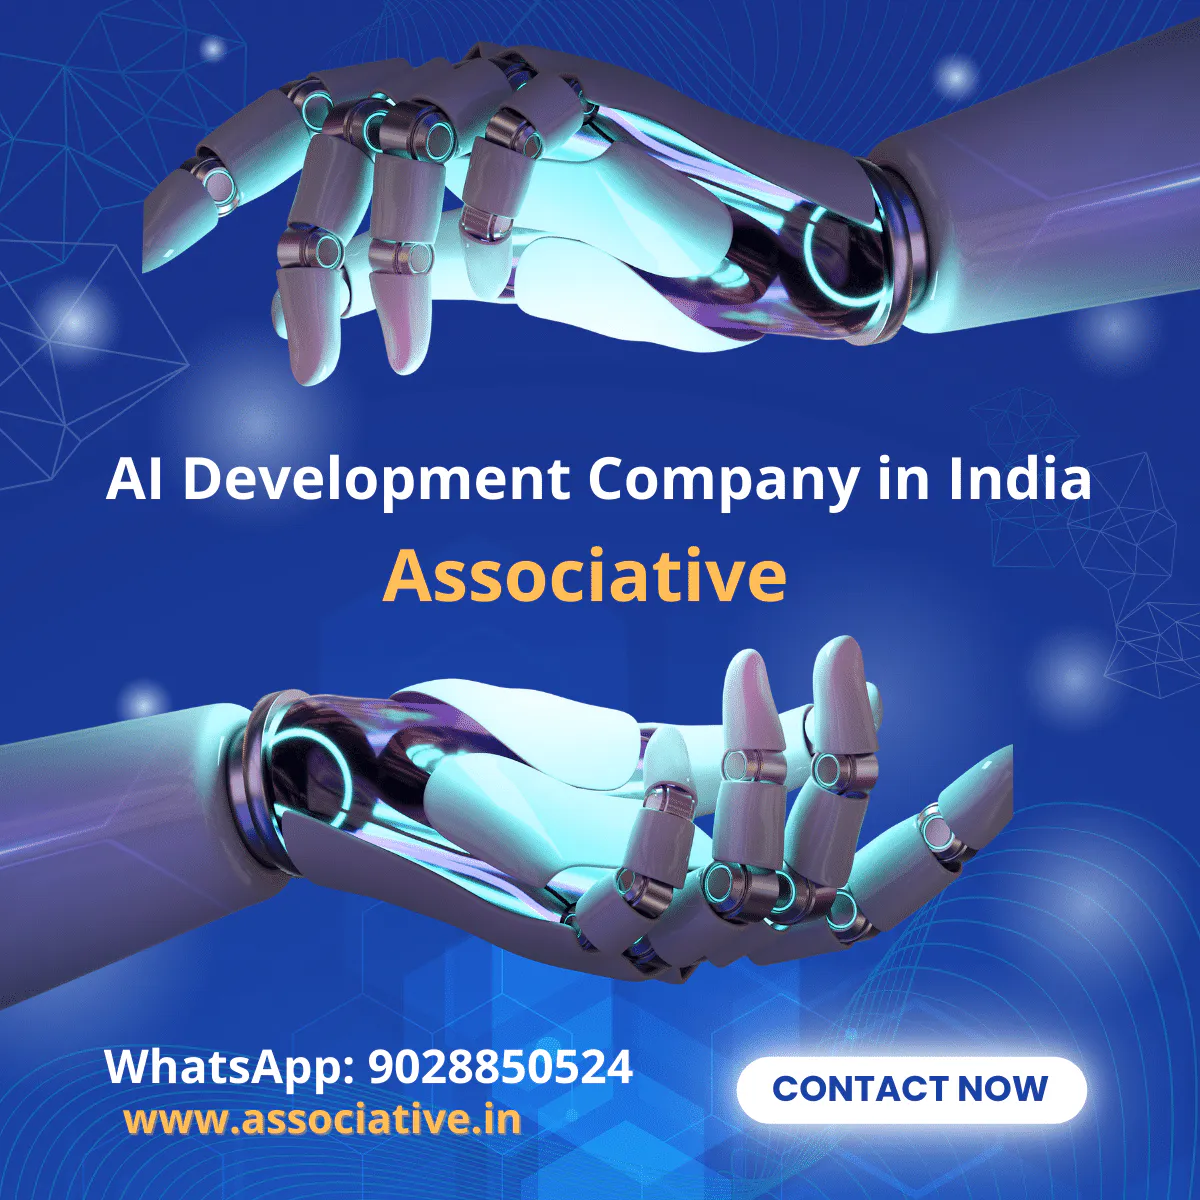 Artificial Intelligence Companies: Partner with Associative to Build a Smarter Future